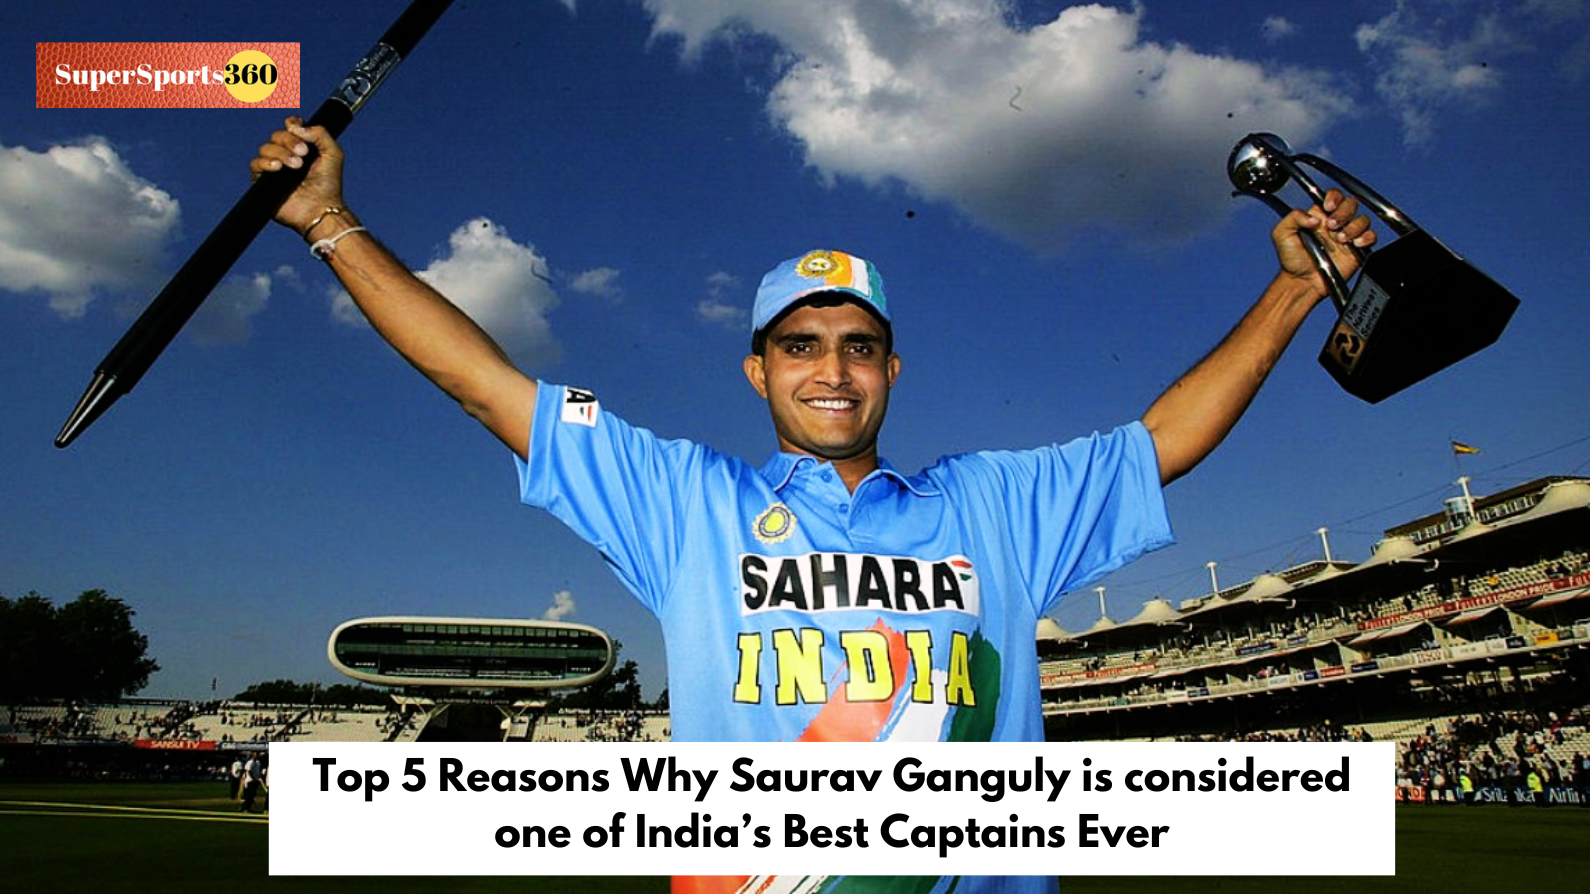 Top 5 Reasons Why Saurav Ganguly is considered one of India’s Best Captains Ever